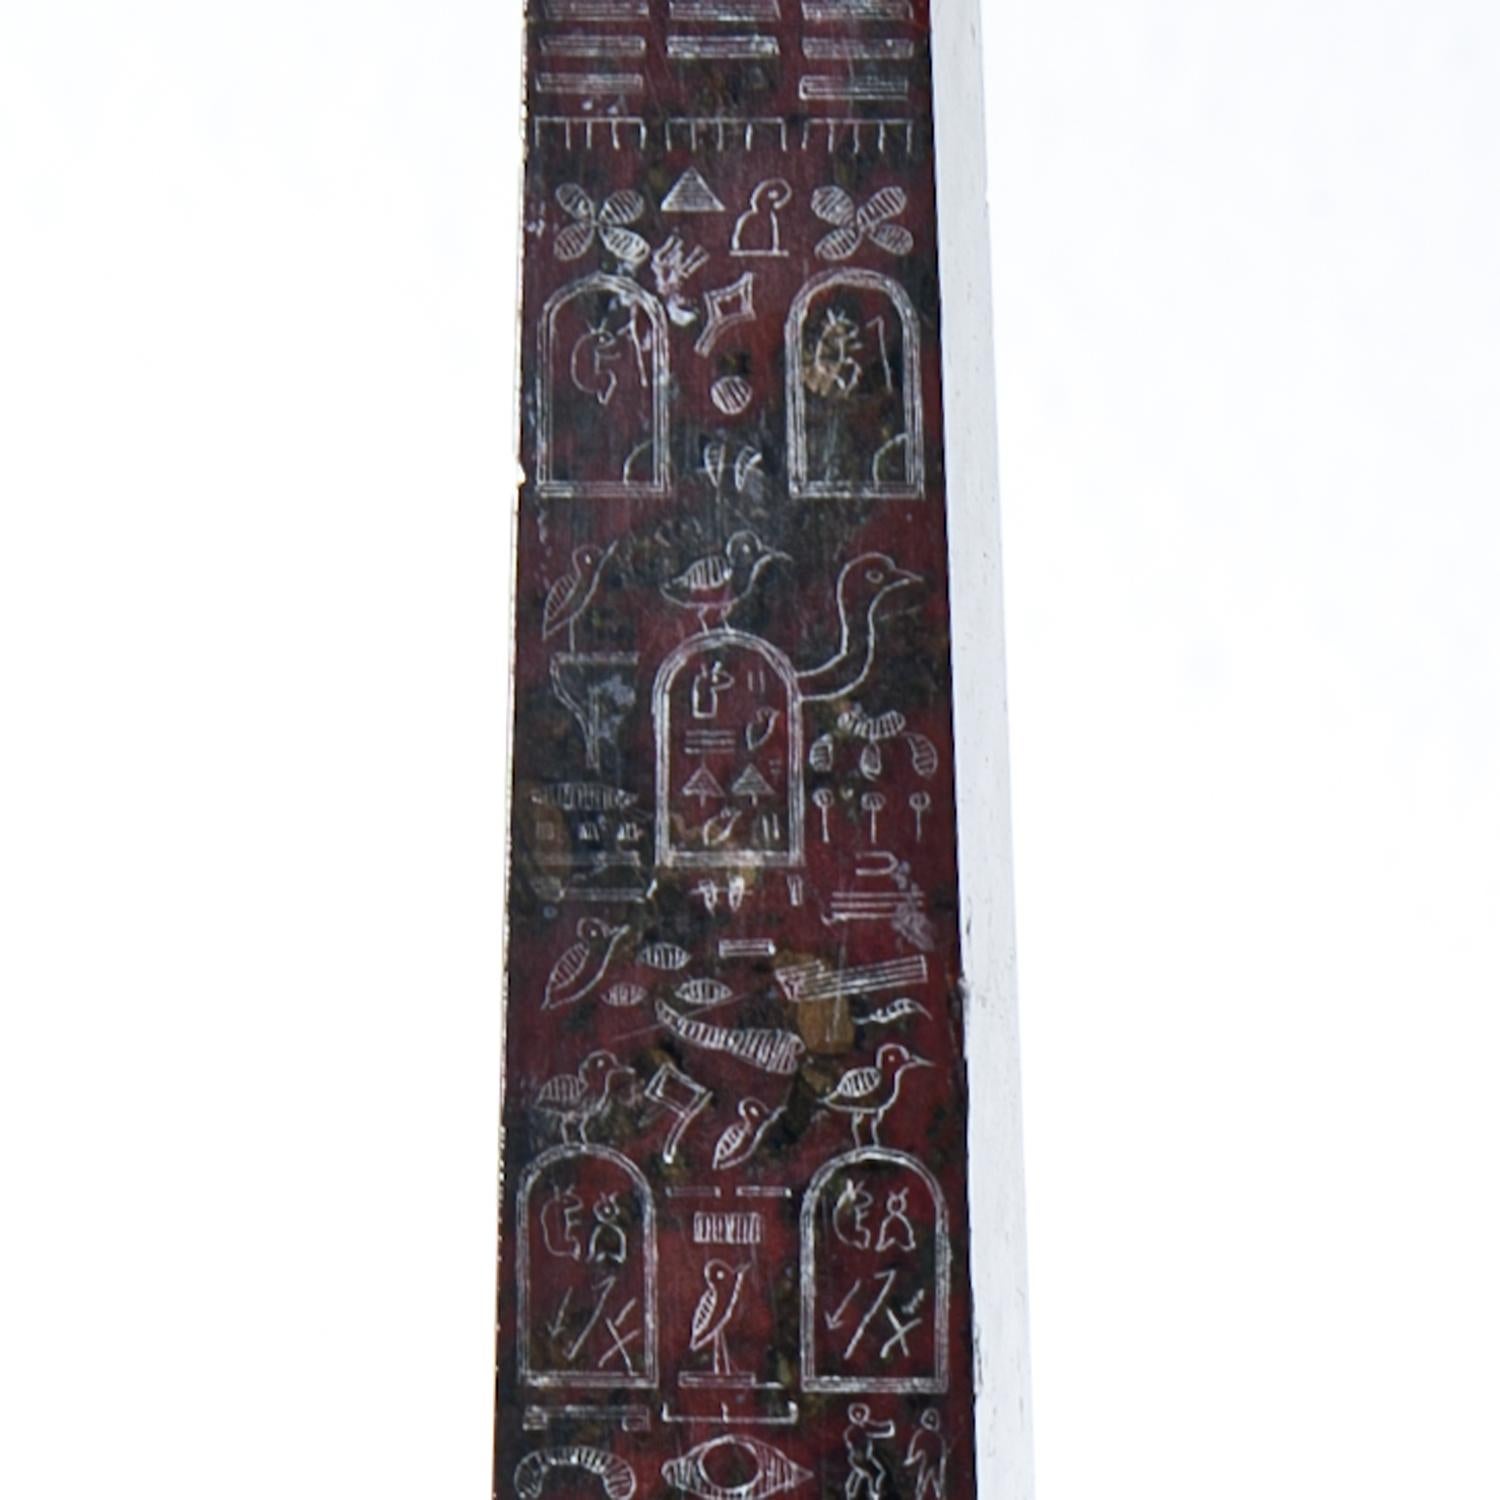 Pair of small obelisks out of red serpentine with hieroglyph decor (North side Cleopatra's Needle, today Central Park, NY - and Lateranobelisk situated on the Piazza San Giovanni to Laterano 1588 by Sixtus V.)